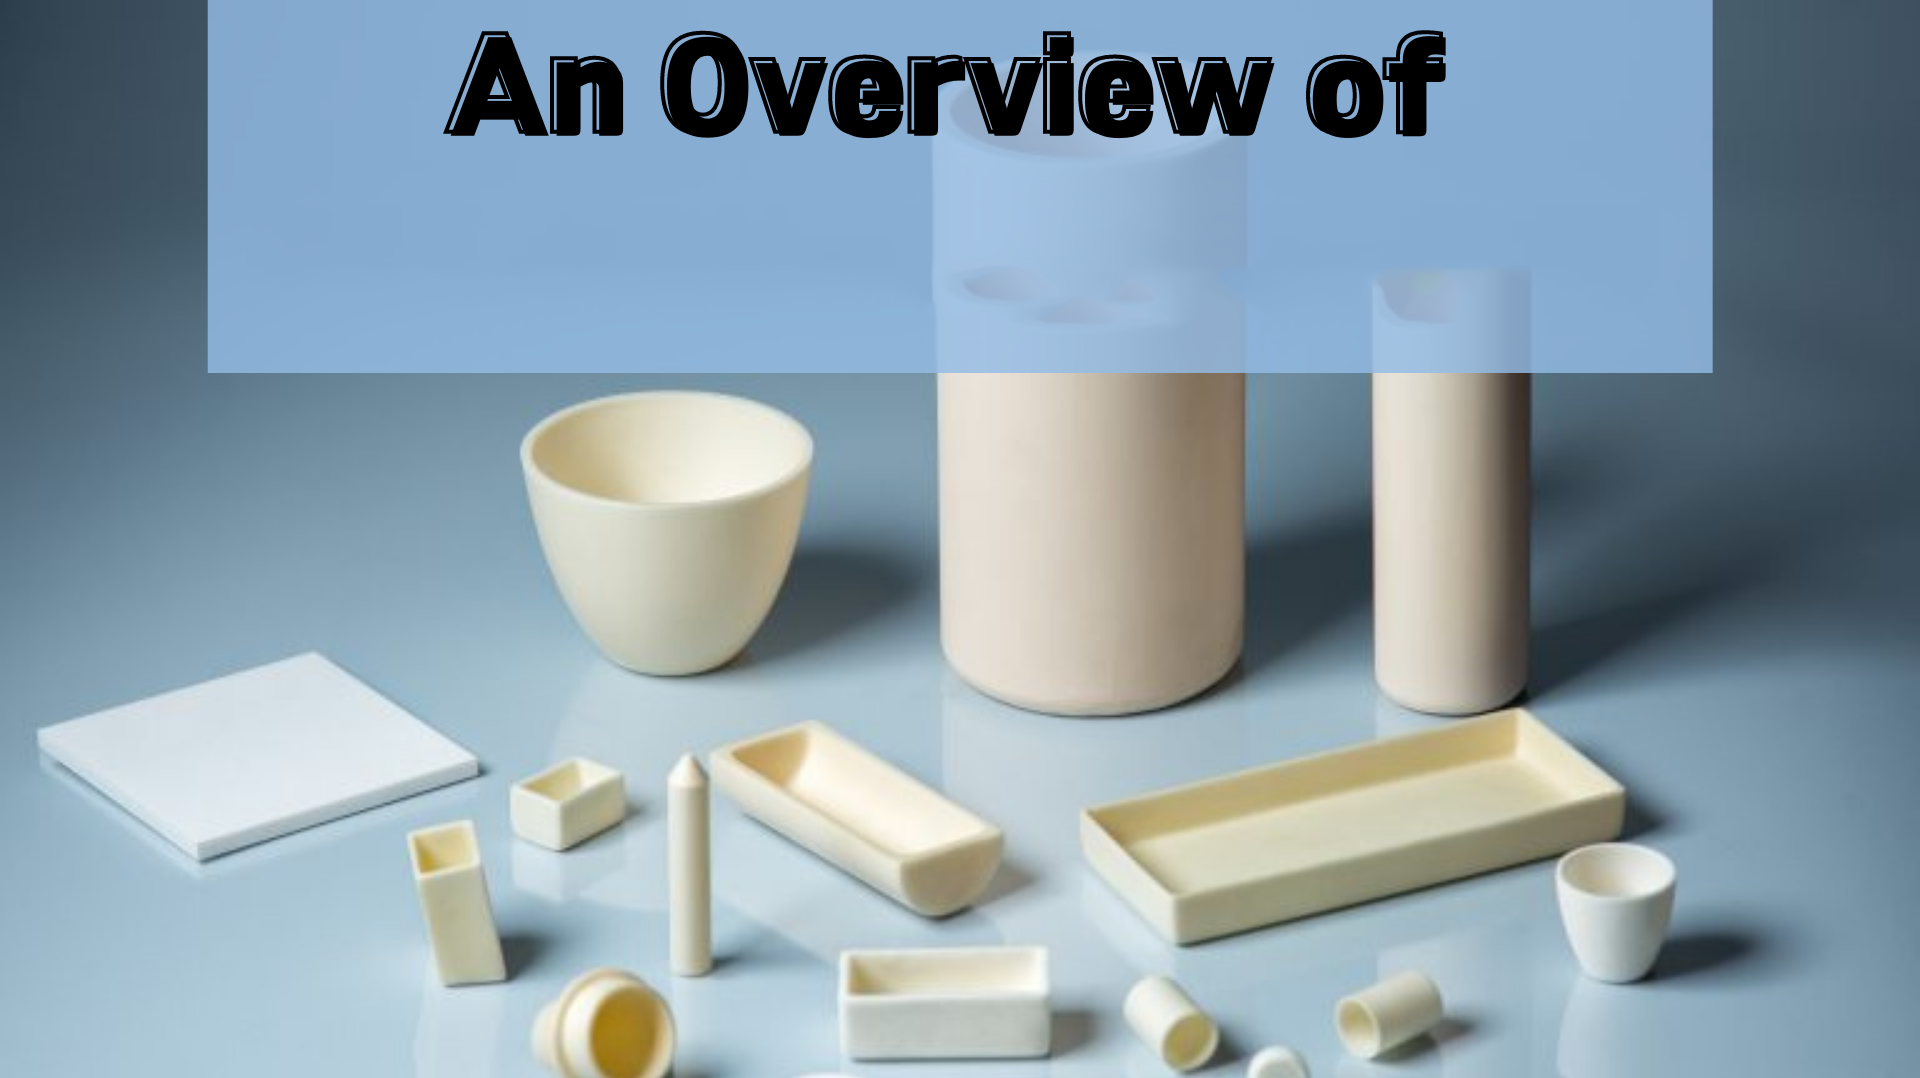 An Overview of China Special Ceramic Parts, Inc.